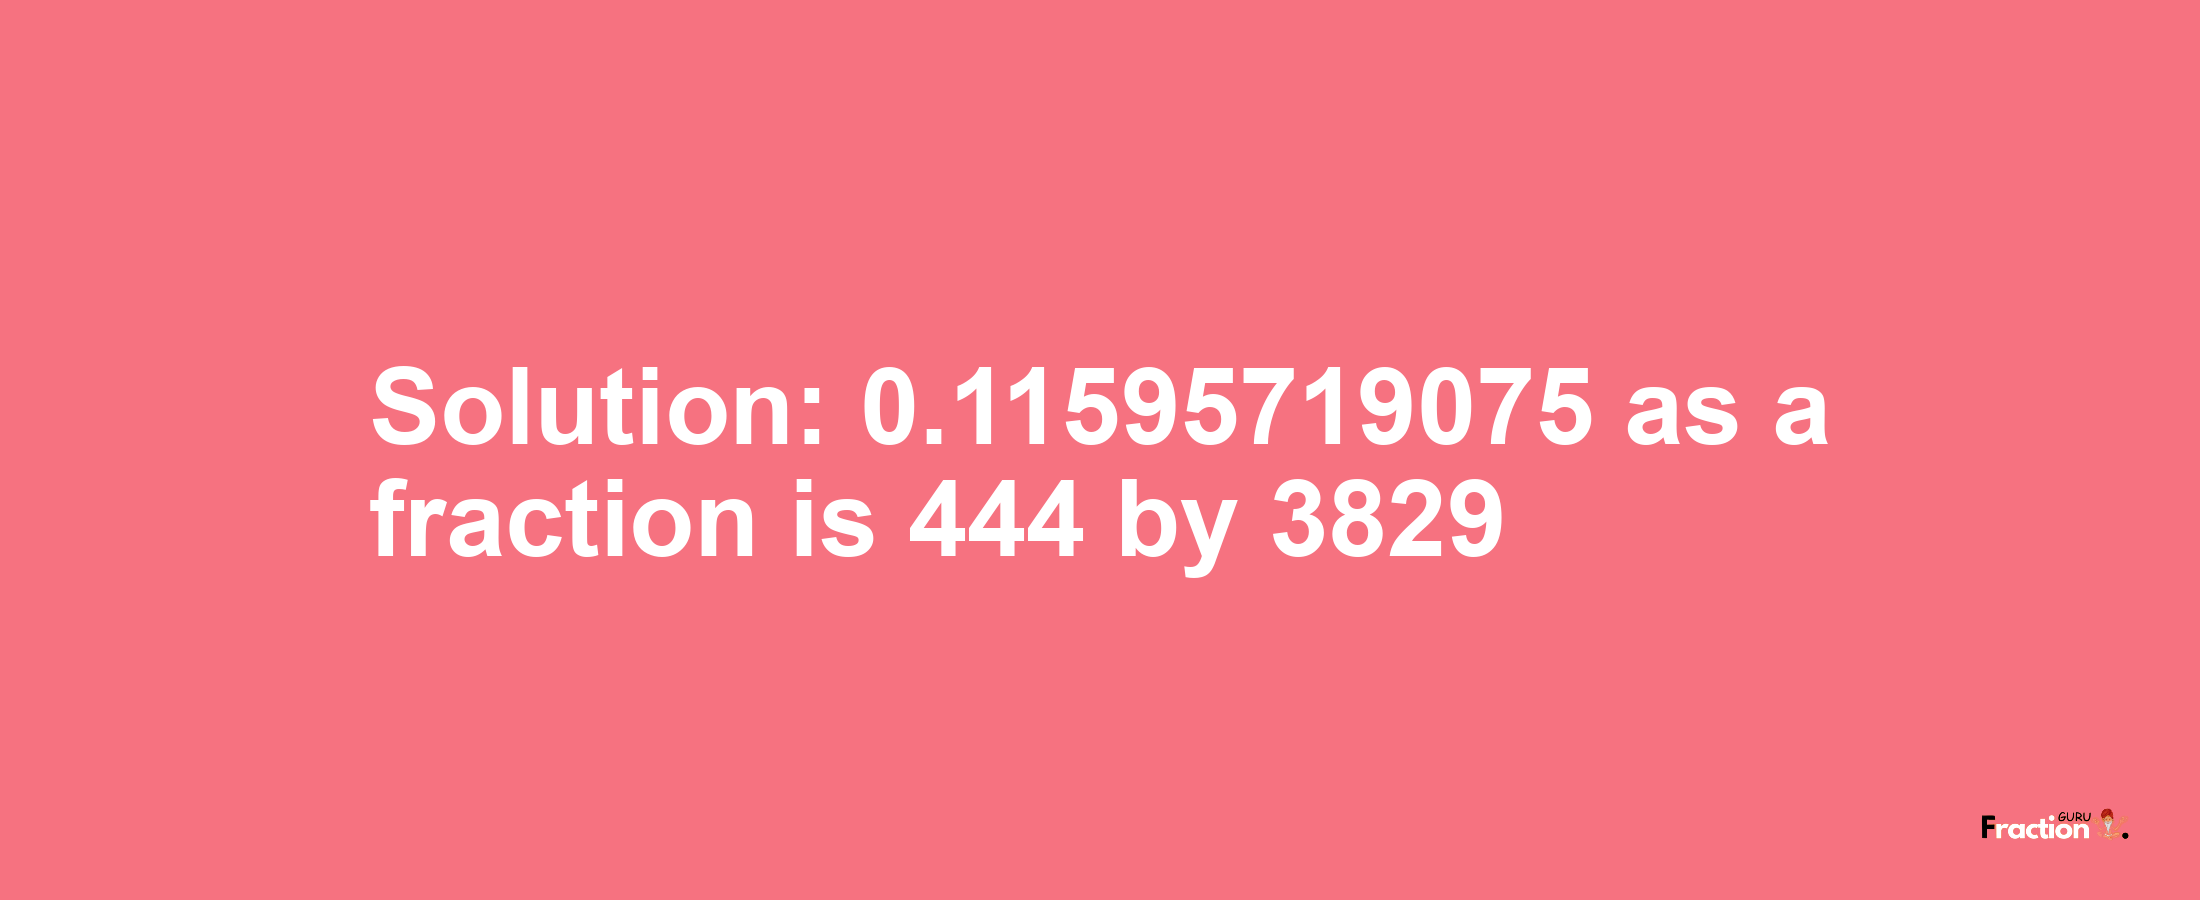 Solution:0.11595719075 as a fraction is 444/3829